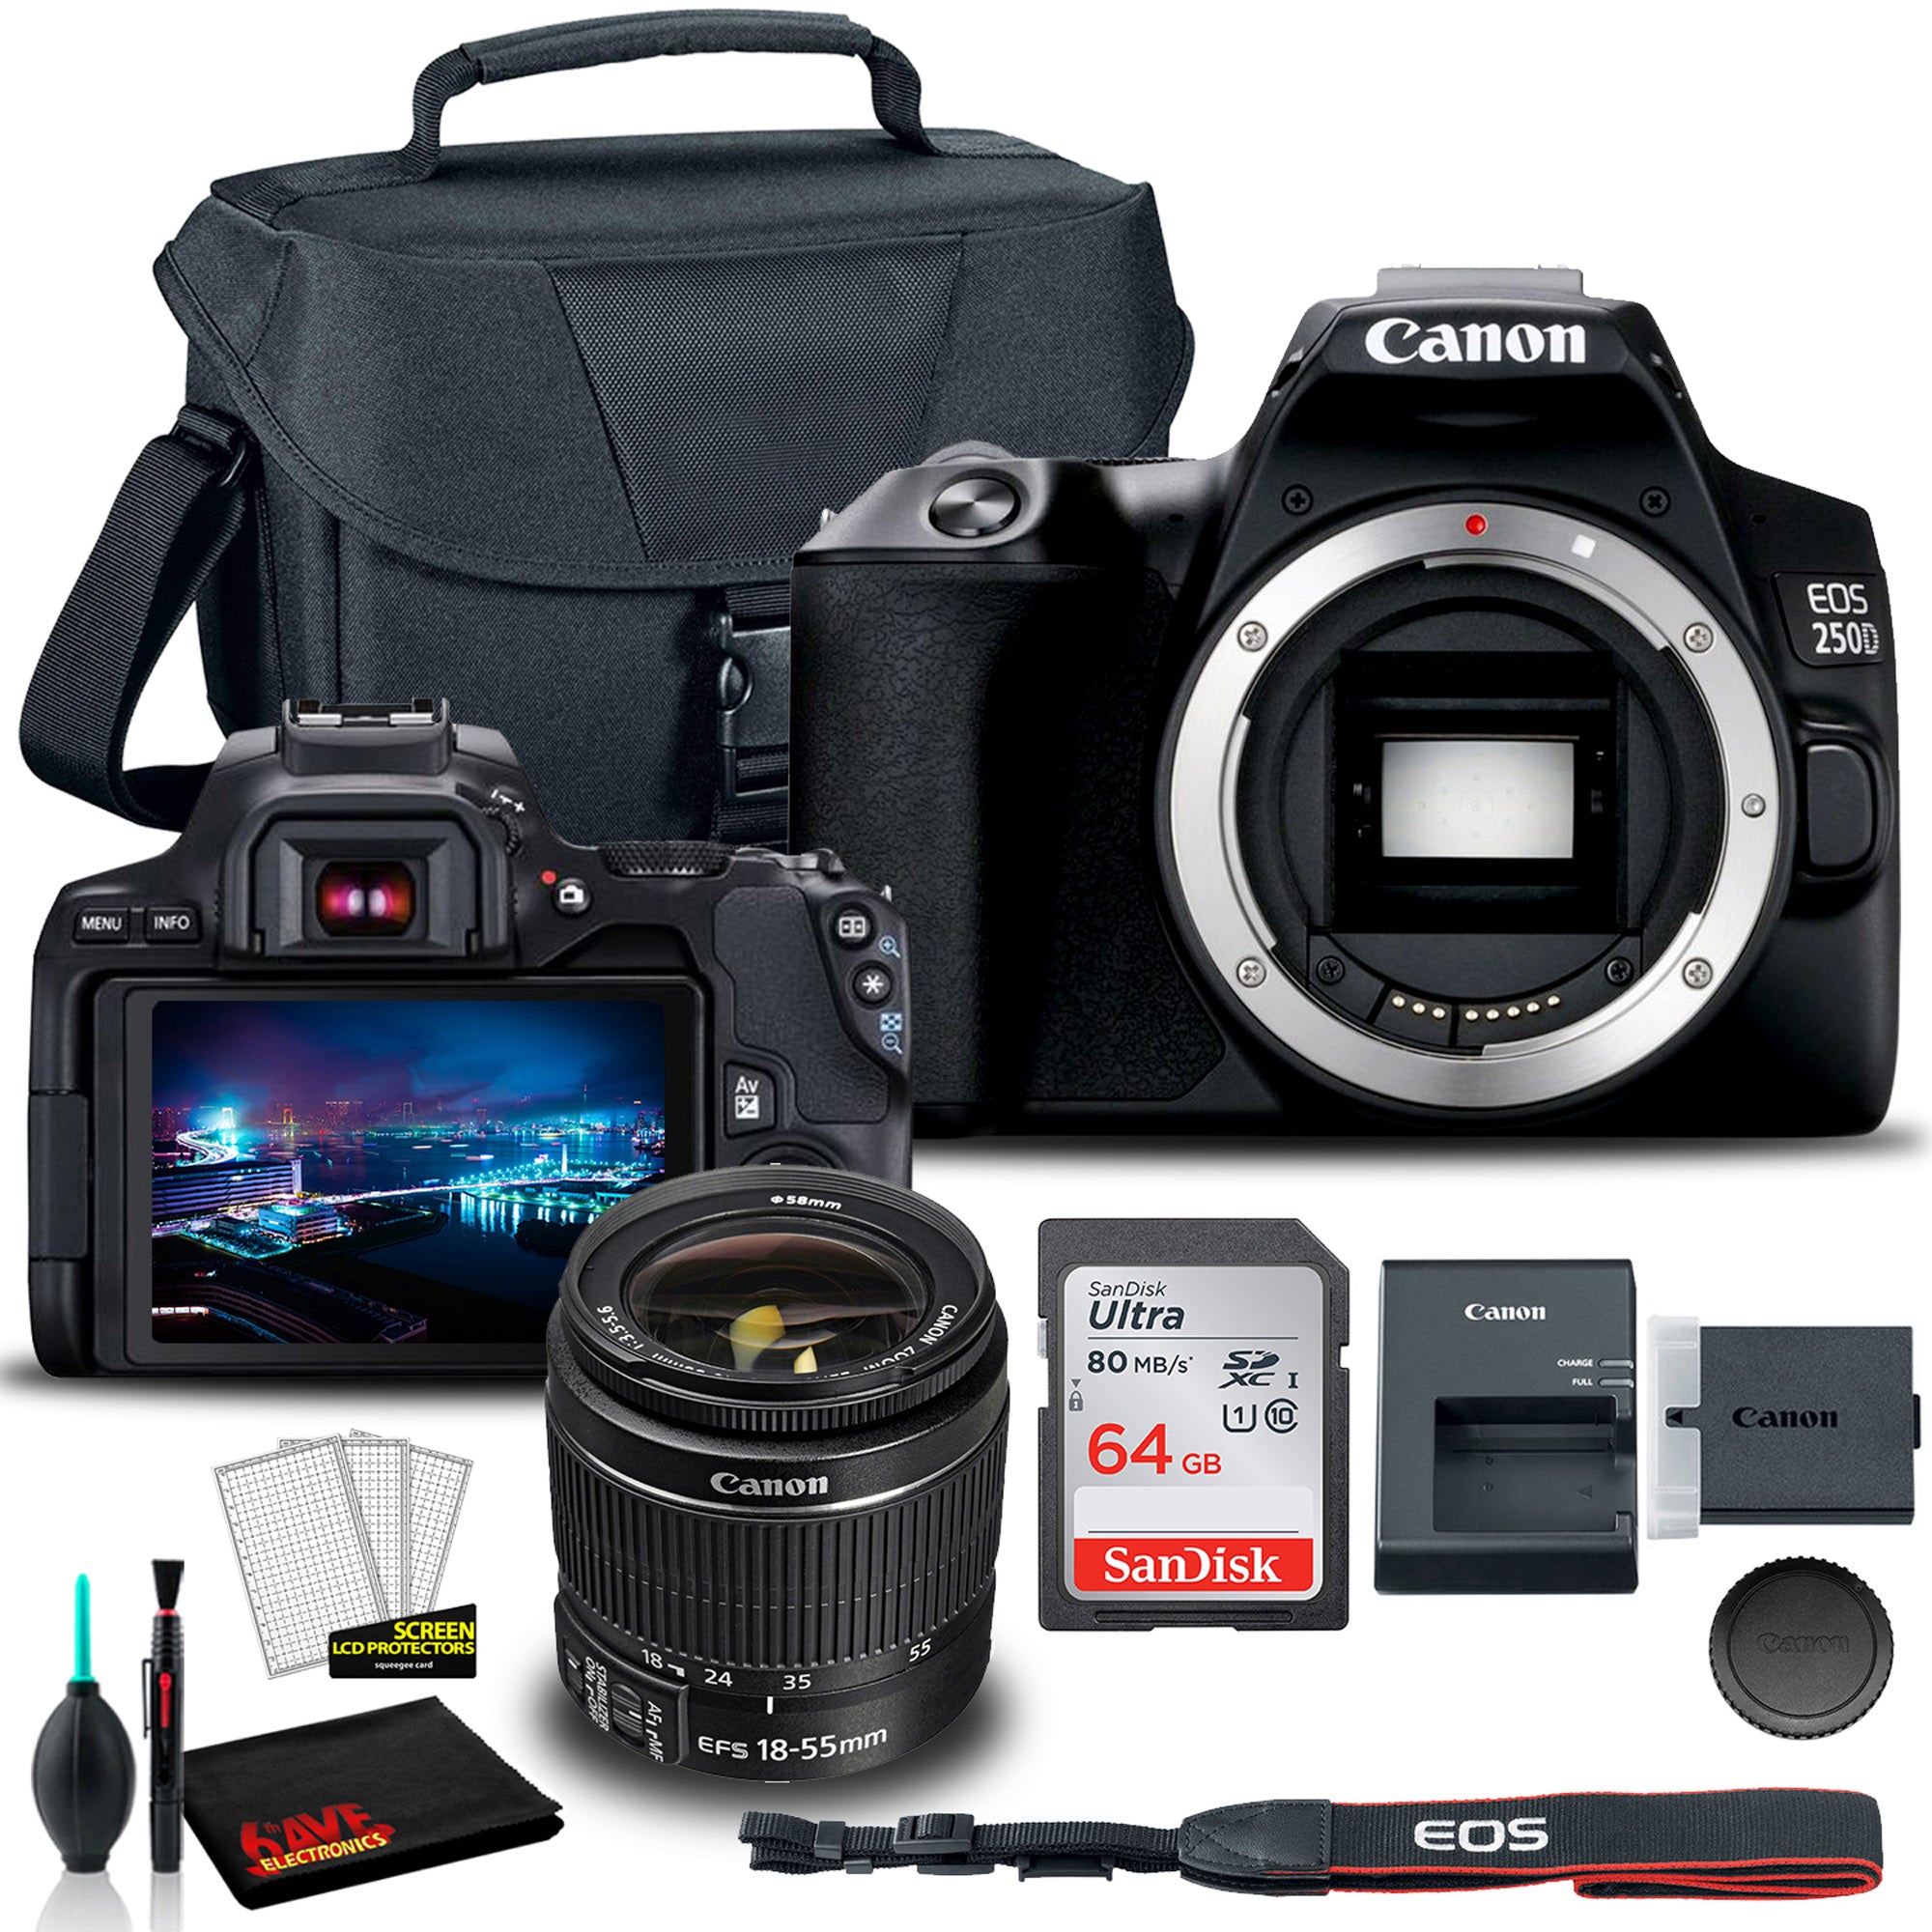 Canon EOS 250D DSLR Camera with 18-55mm Lens (Black) (3453C002) +  EOS Bag +  Sandisk Ultra 64GB Card + Cleaning Set And More (International Model)